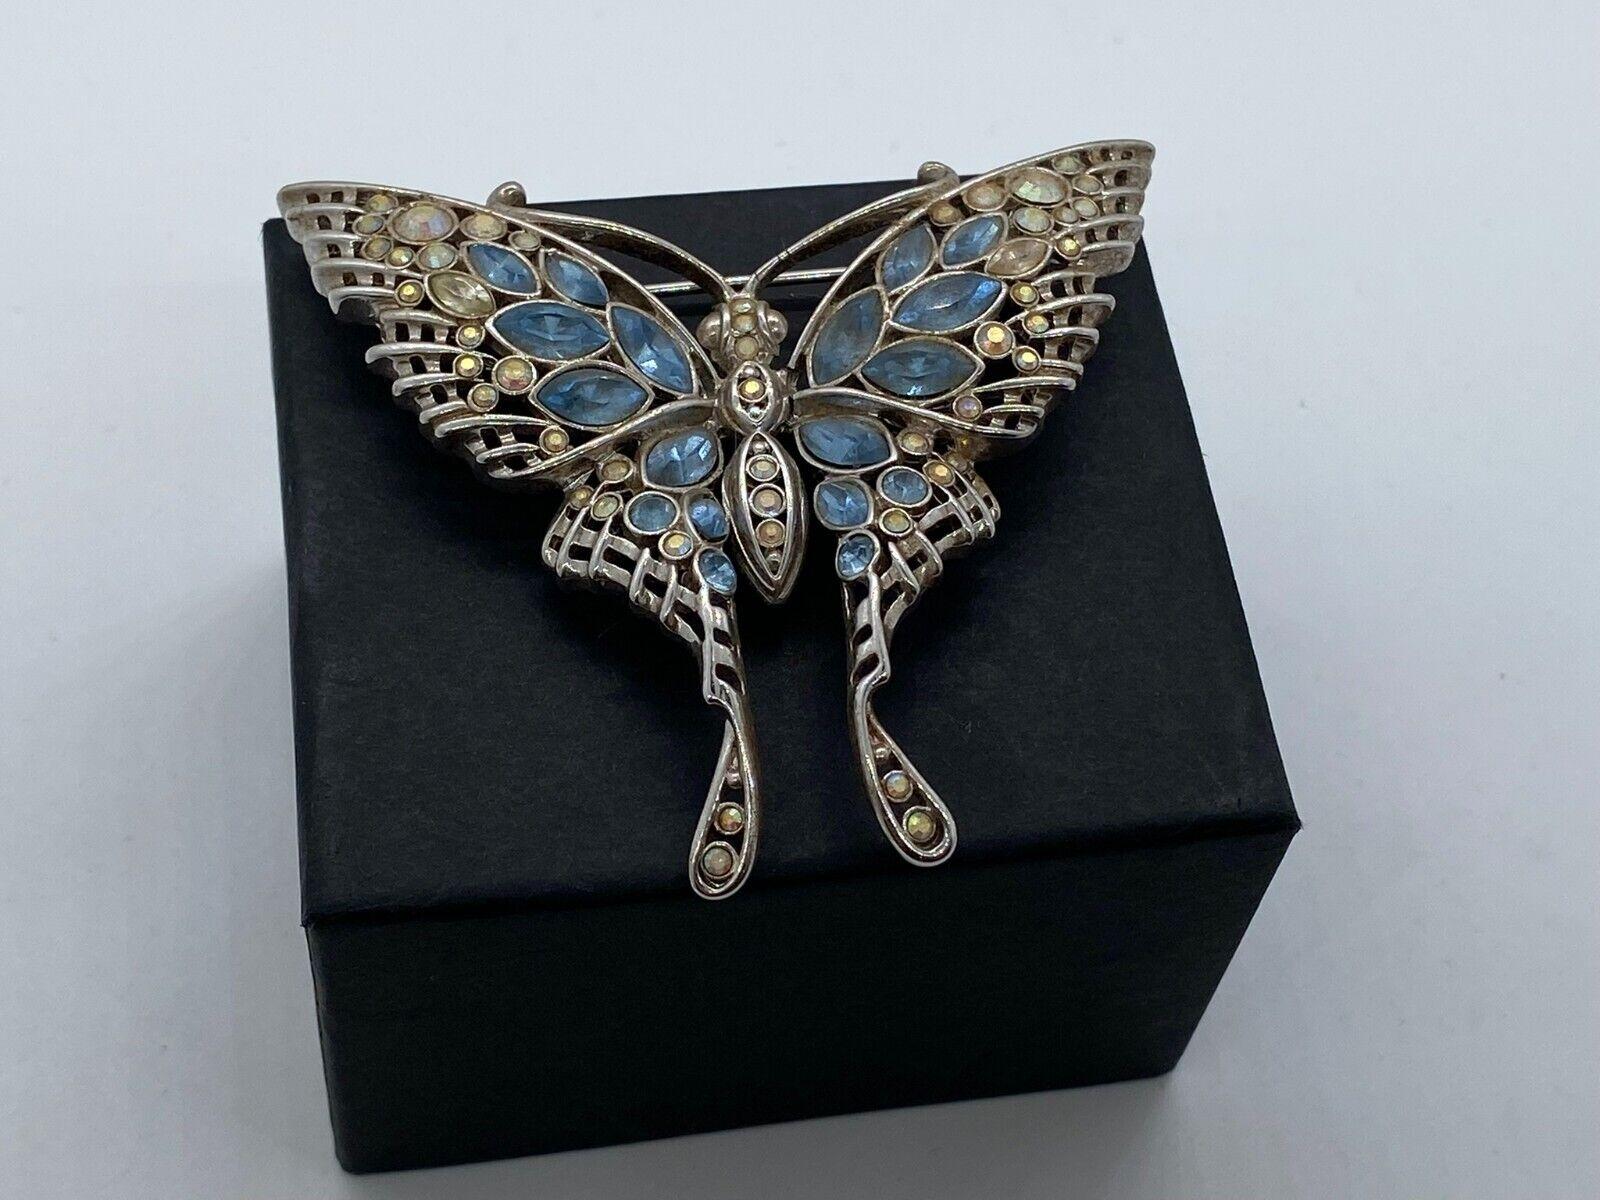 Simply Beautiful! Signed Nolan Miller Designer Blue and Clear Crystal Dragonfly Brooch. Hand set with a myriad of Sparkling Crystals in blue and clear. Stunning Statement Brooch! Measuring approx. 2.5